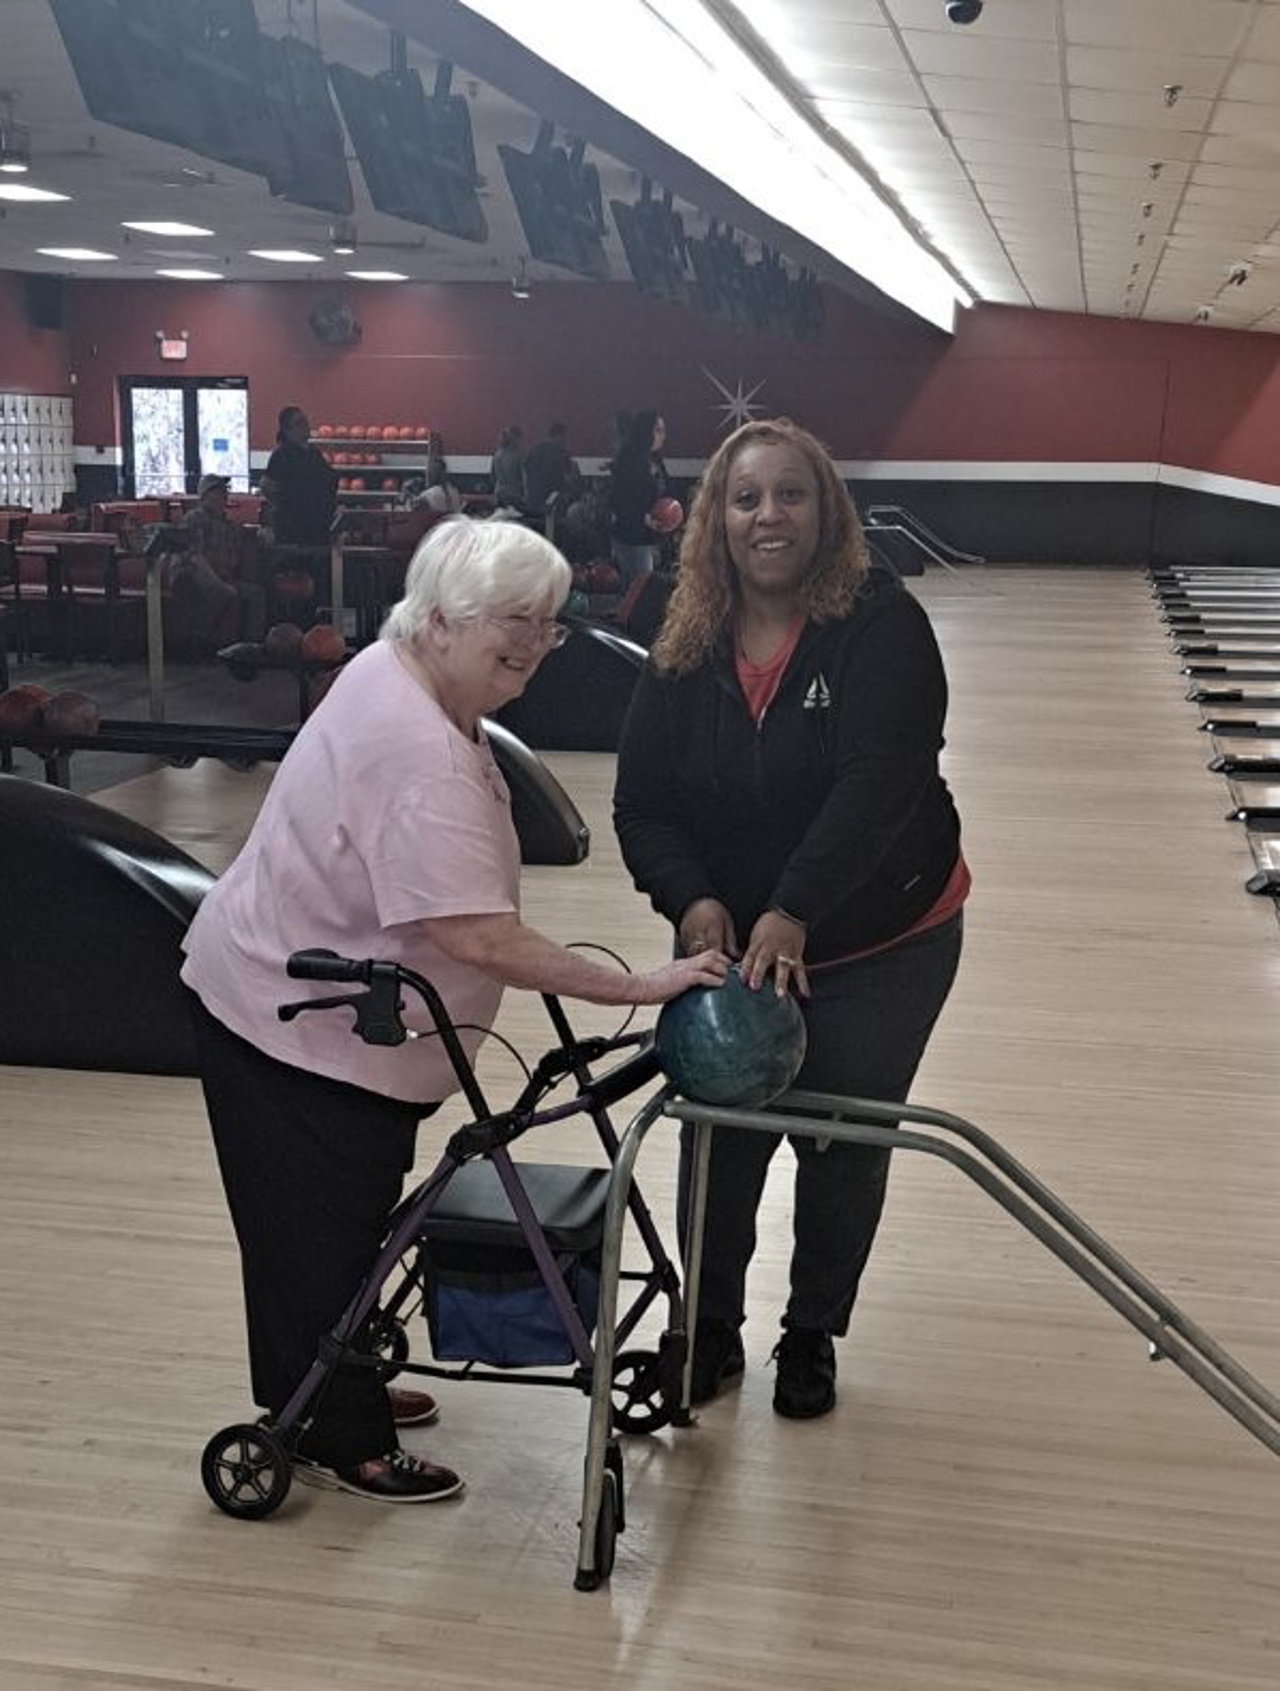 A woman with gray hair and another woman are enjoying a day at the bowling alley. The gray haired woman, wearing a pink shirt and using a walker, is smiling as she prepares to bowl with the assistance of a special ramp. The other woman, wearing a black hoodie, is helping her position the ball on the ramp. They are in a brightly lit bowling alley with several lanes visible in the background, along with other people bowling.